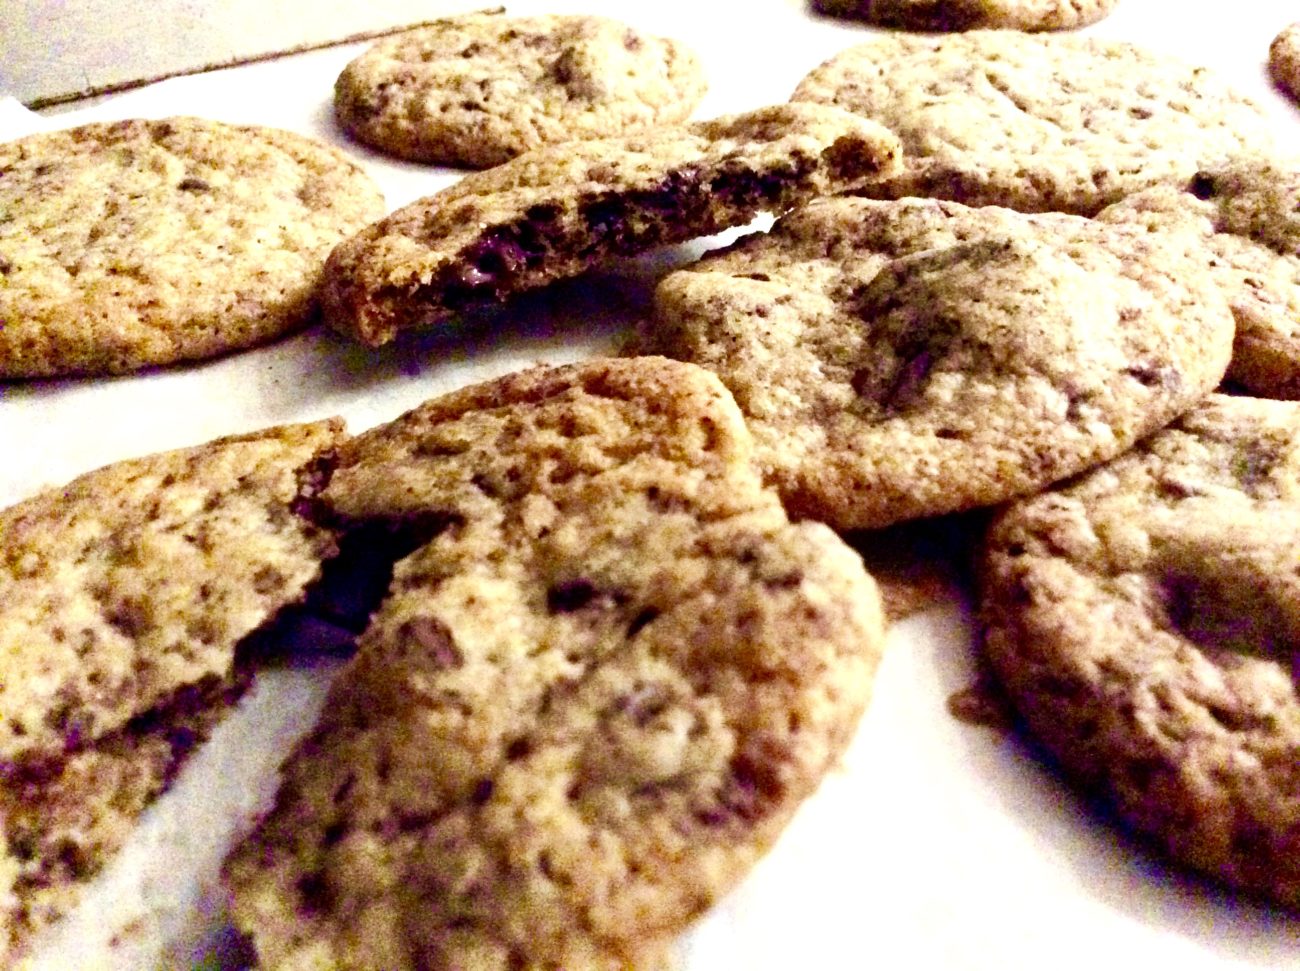 CLASSIC CHOCOLATE CHIP COOKIES